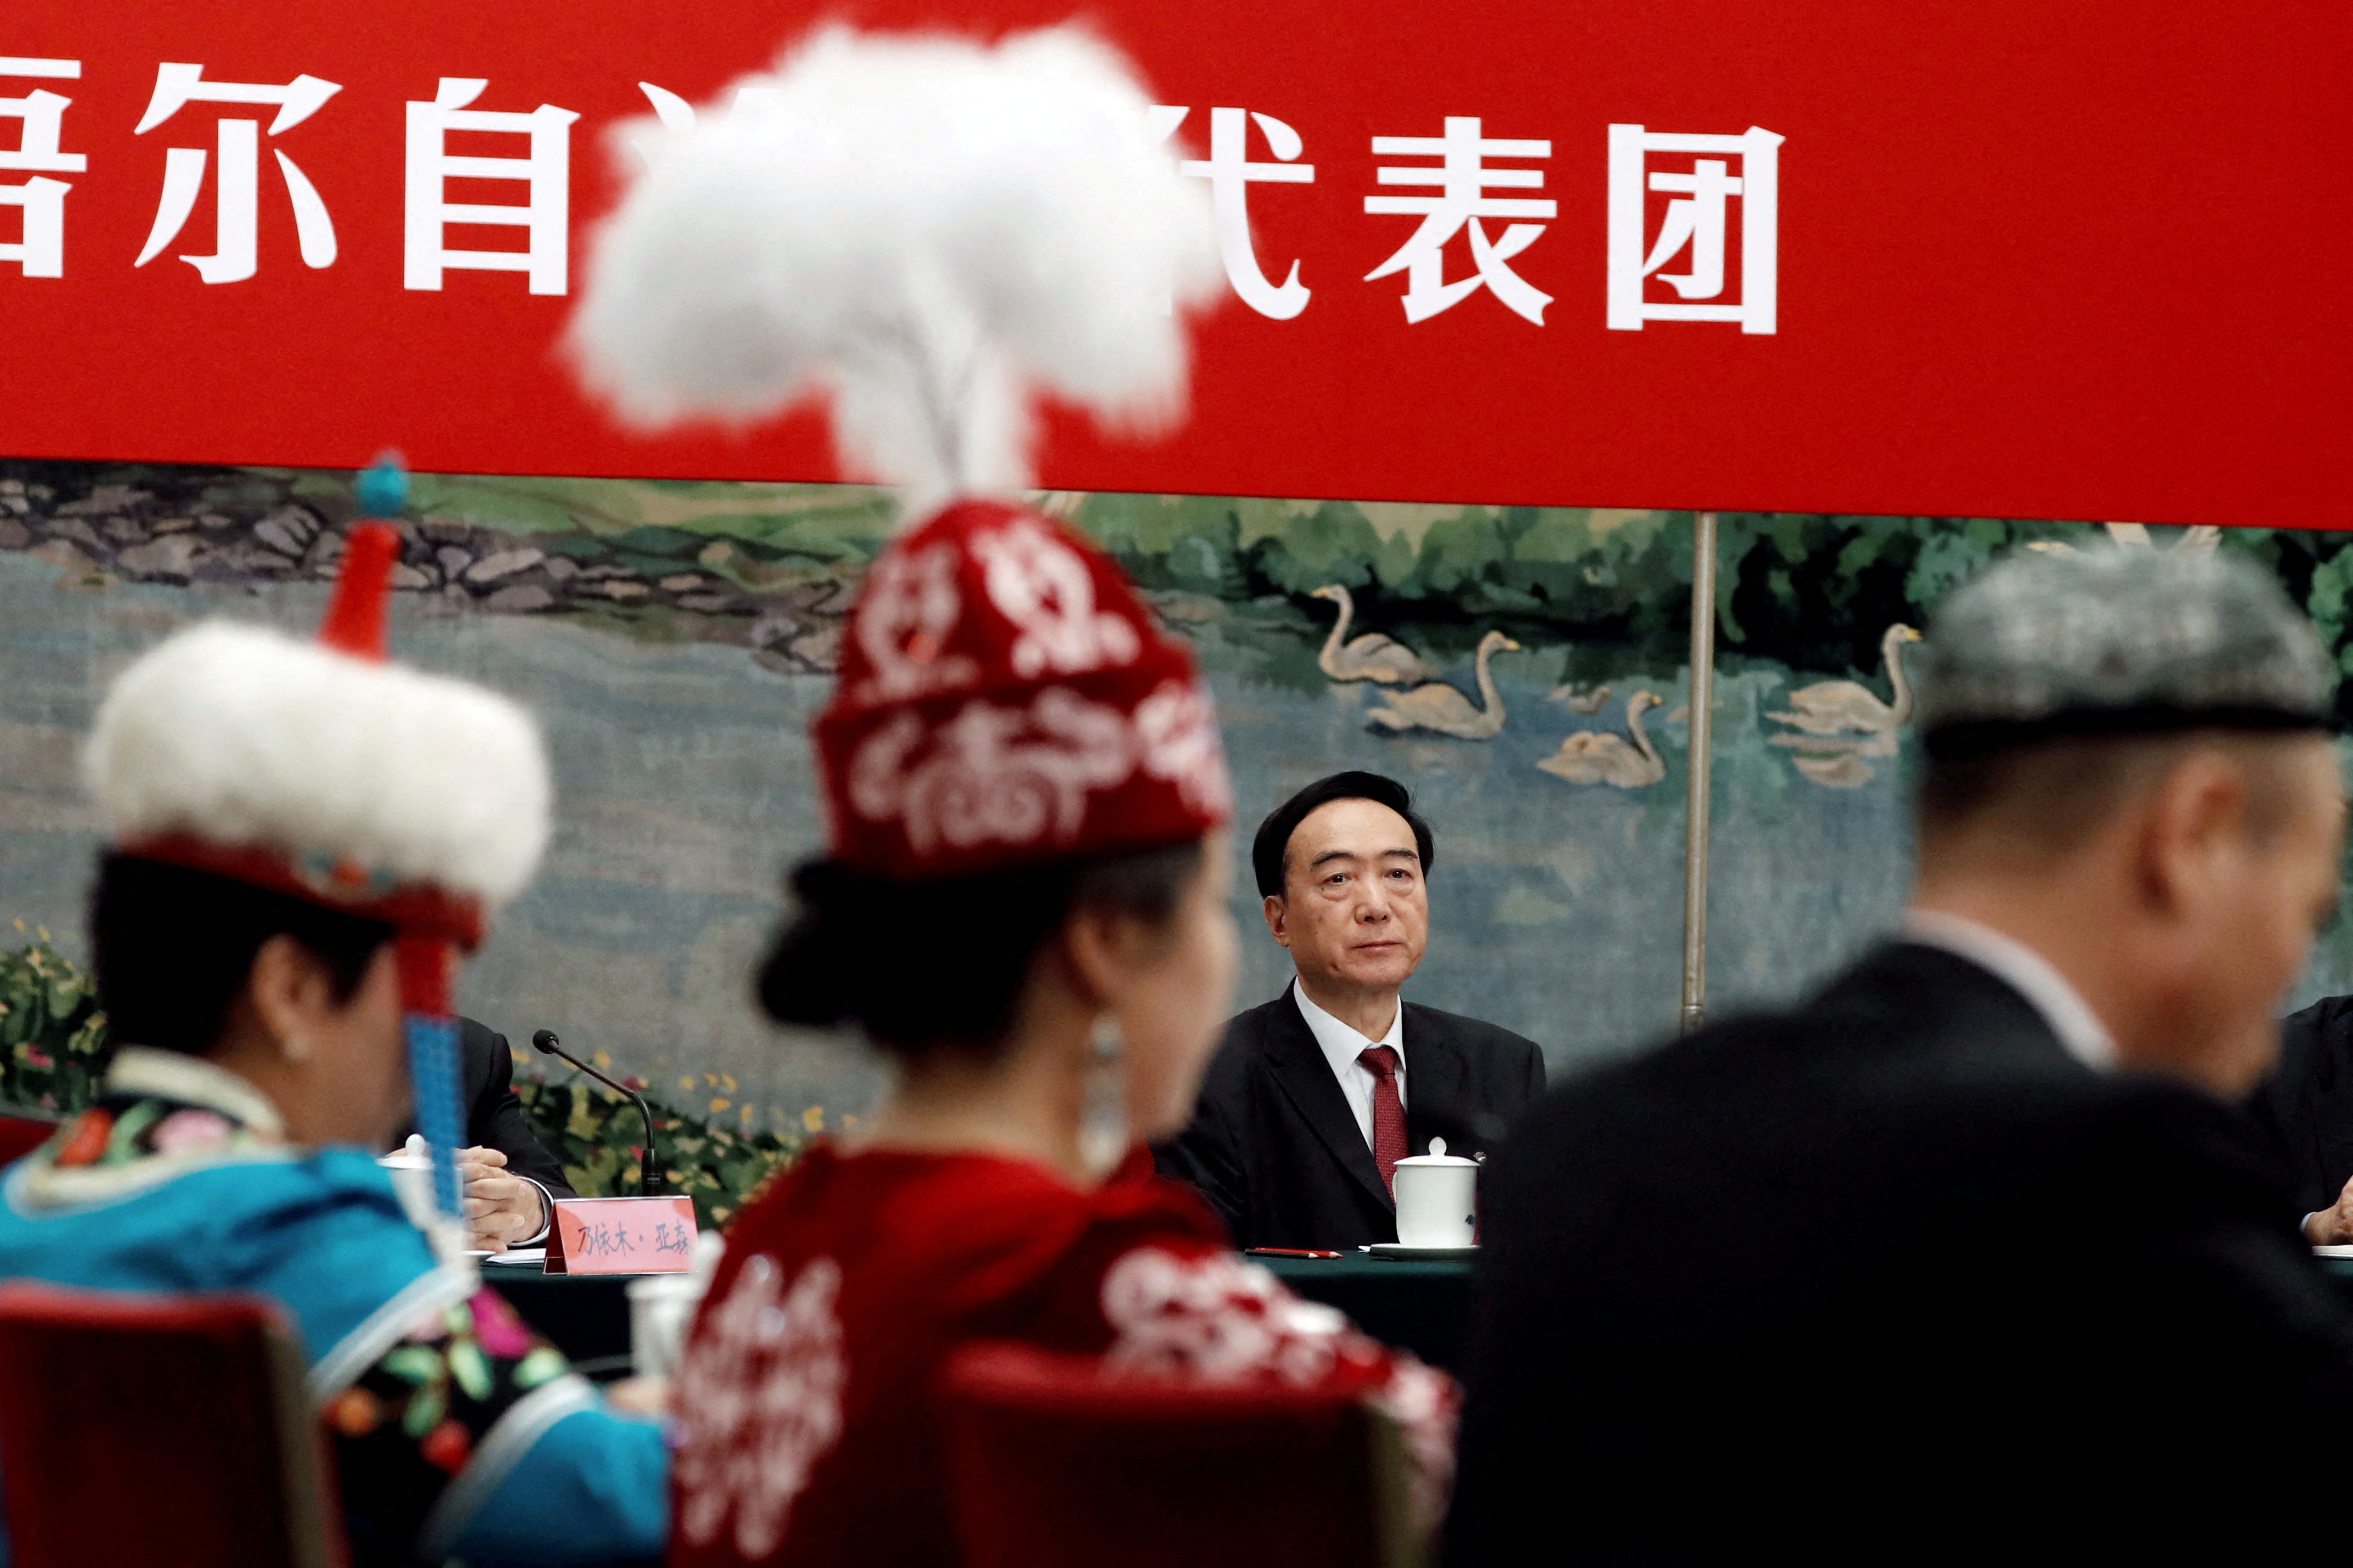 Xinjiang Uyghur Autonomous Region Party Secretary Chen Quanguo attends a group discussion session in Beijing